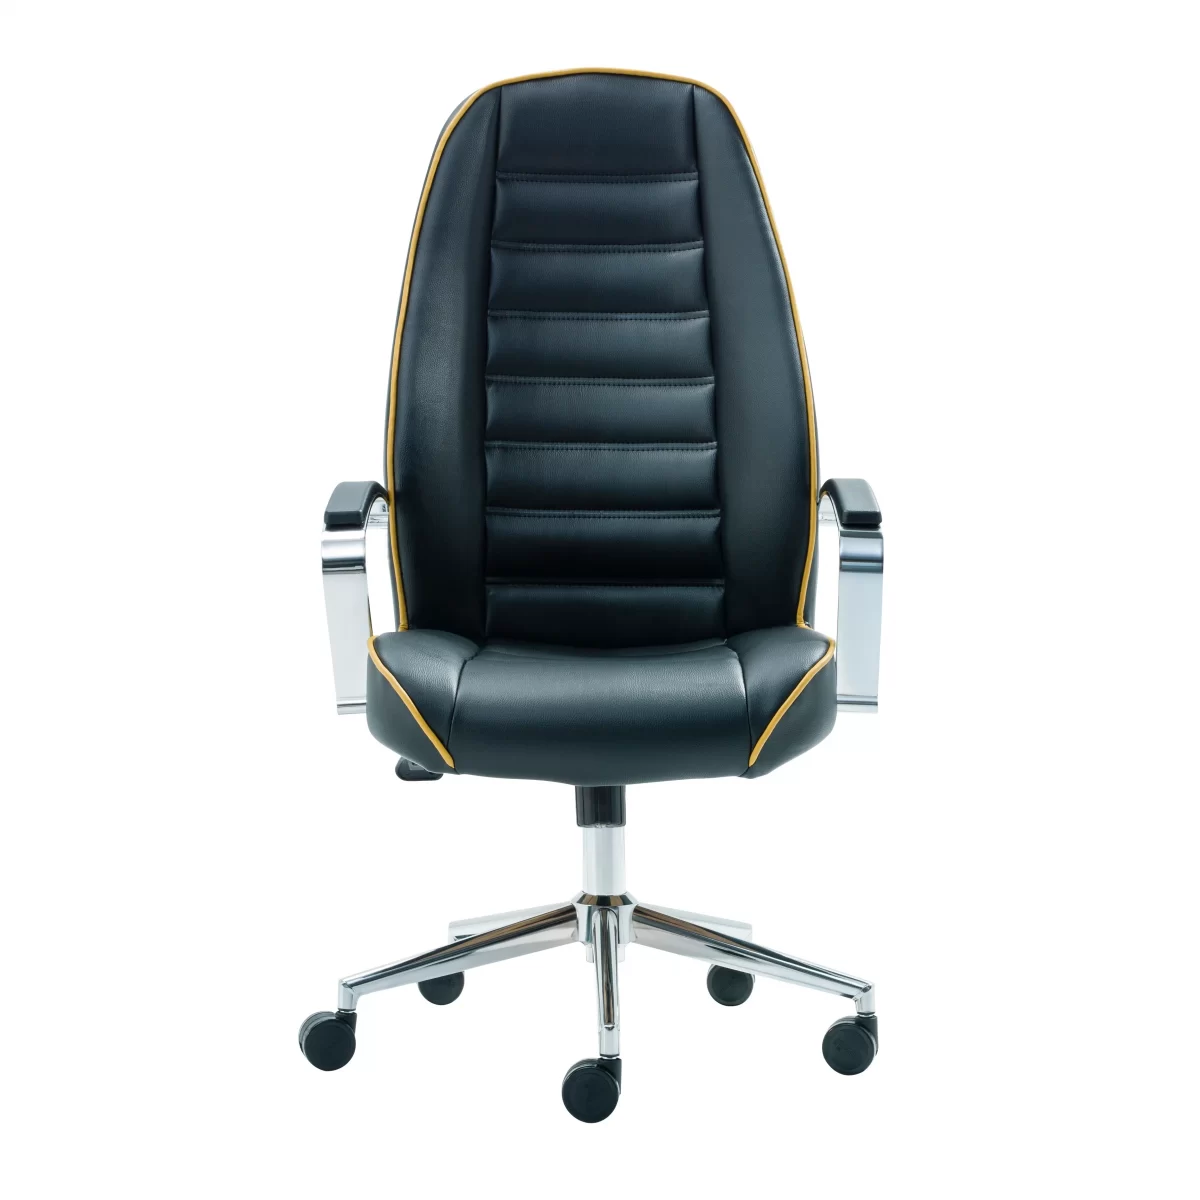 Karina Executive Office Chair Modern Office Chairs Turkey 3 scaled